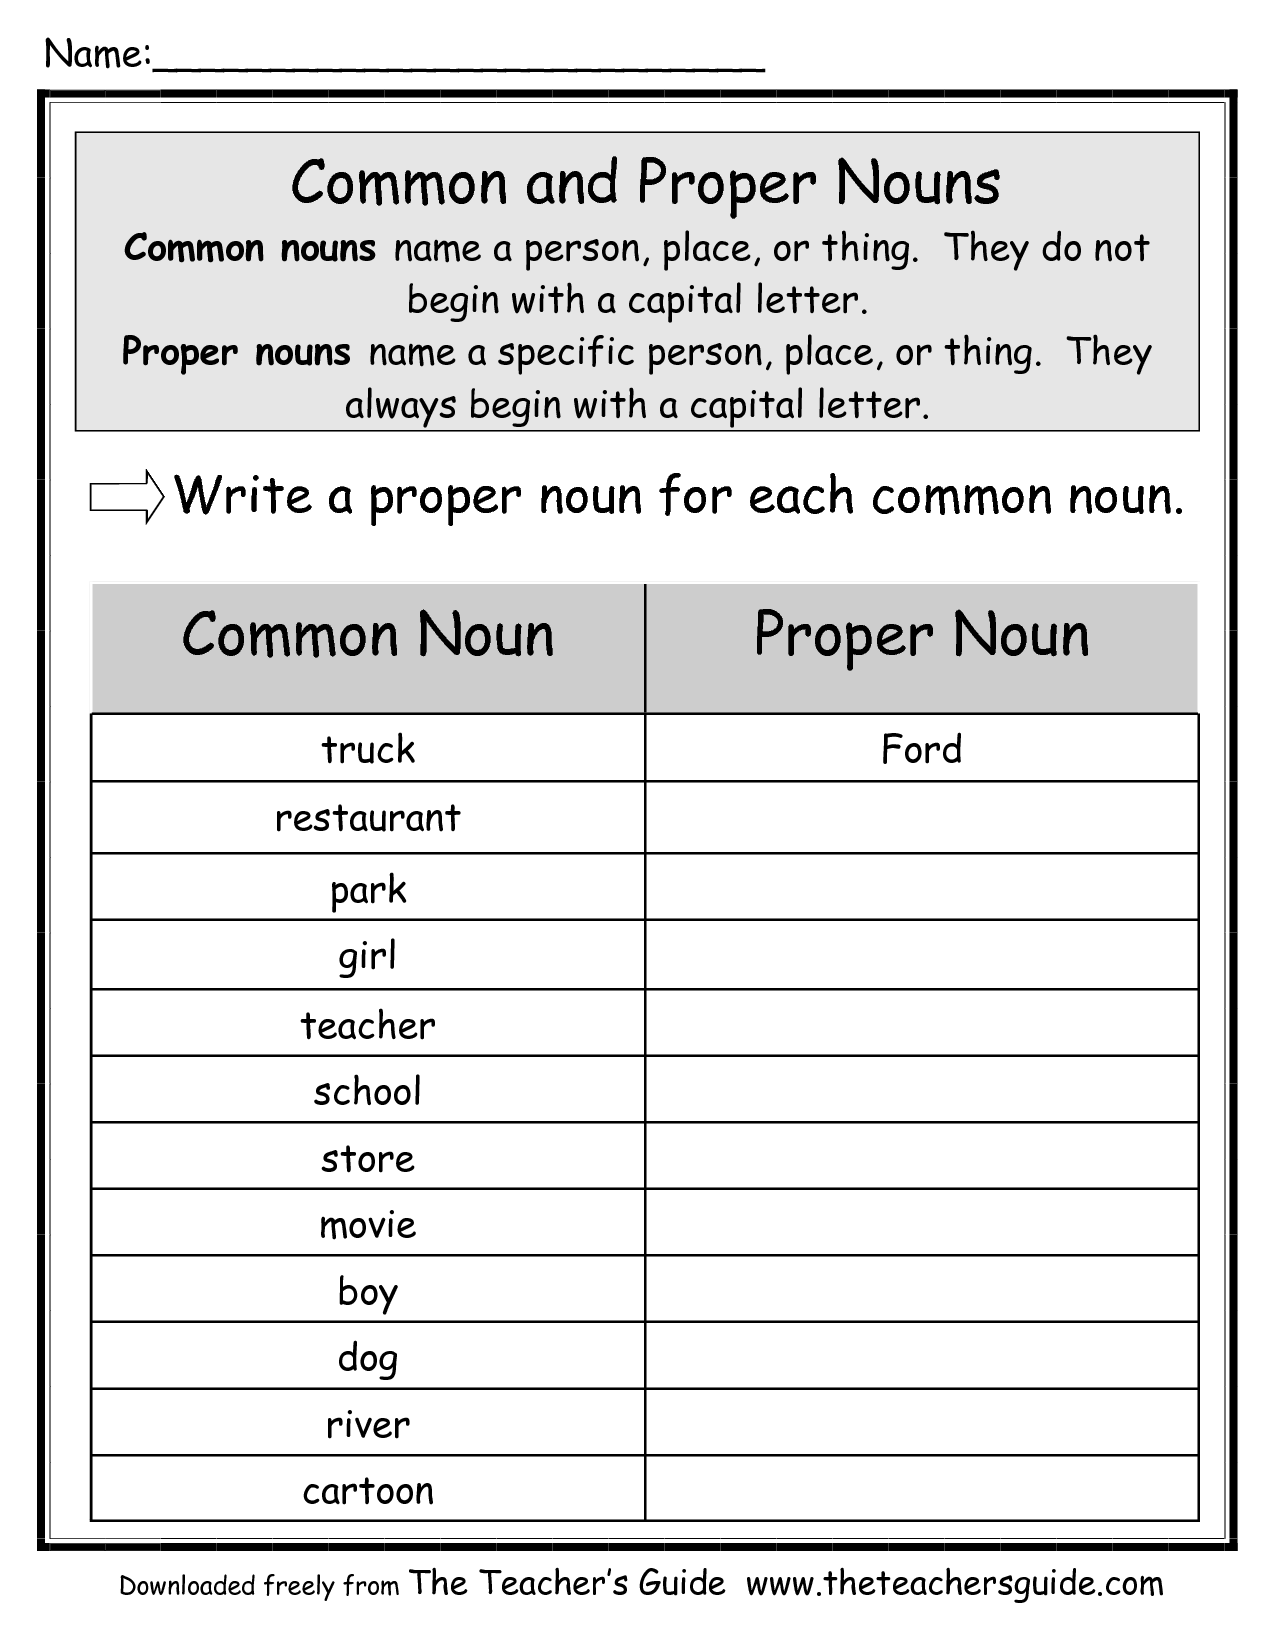 common-and-proper-noun-worksheet-for-class-3-classify-proper-nouns-vs-common-nouns-worksheet